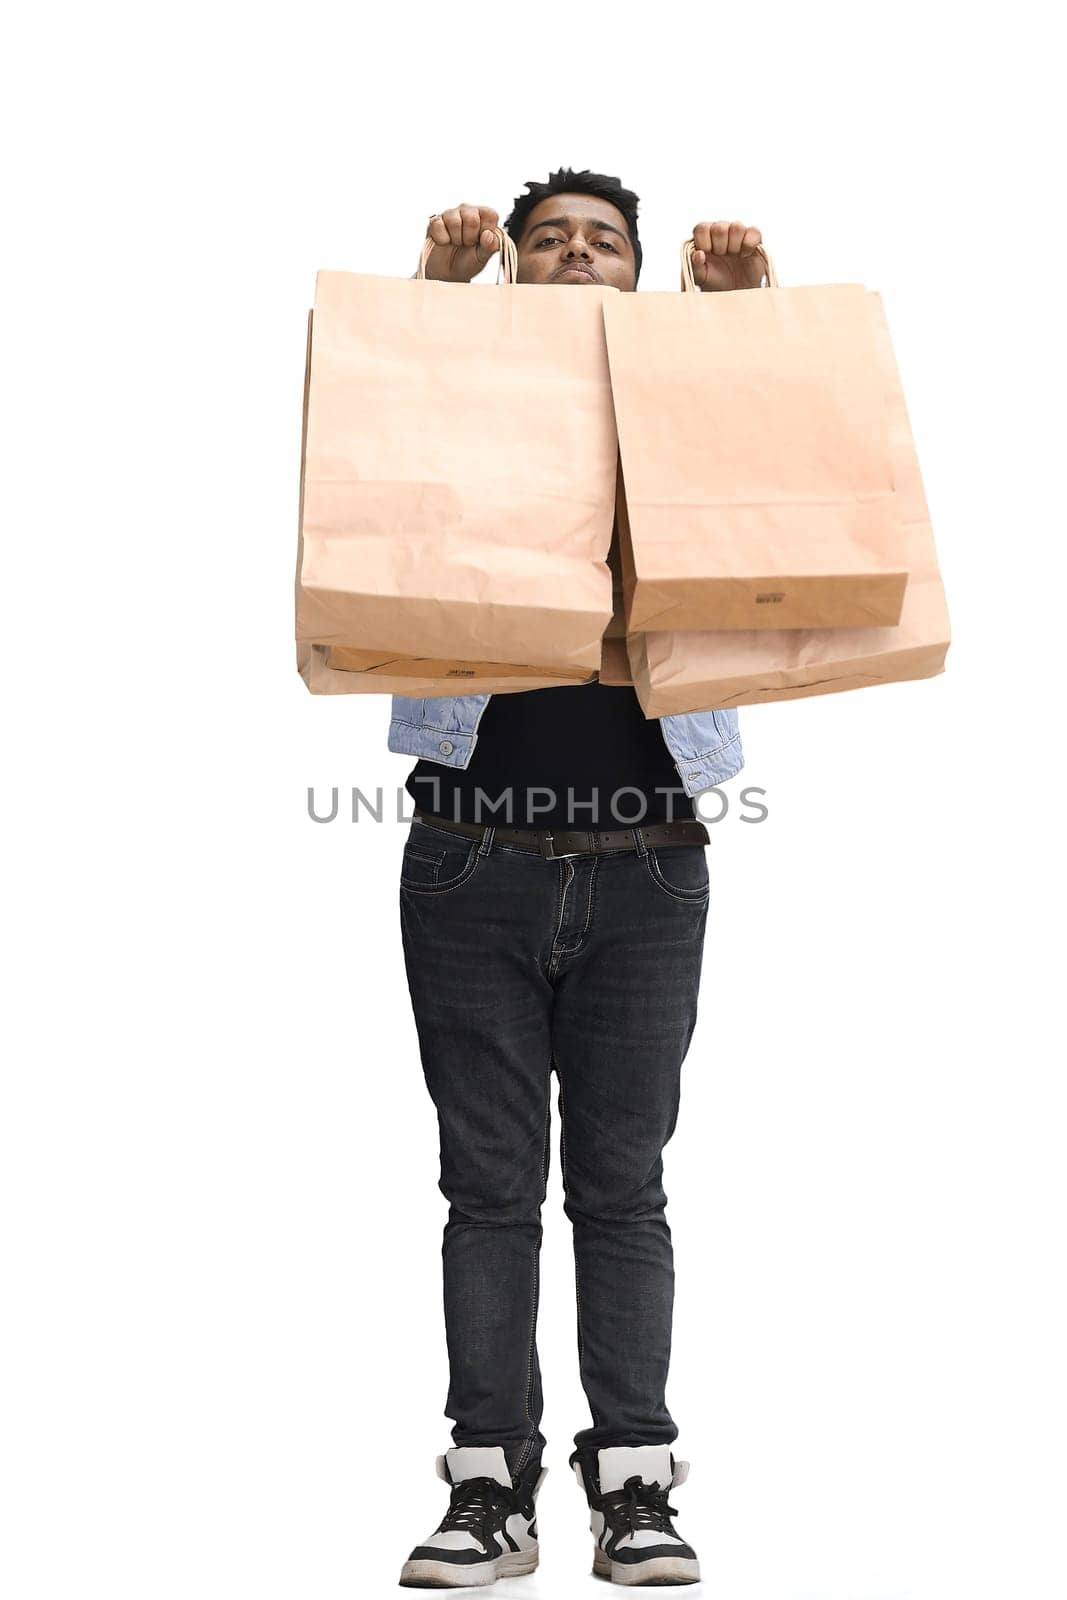 Man on a white background with shoppers.